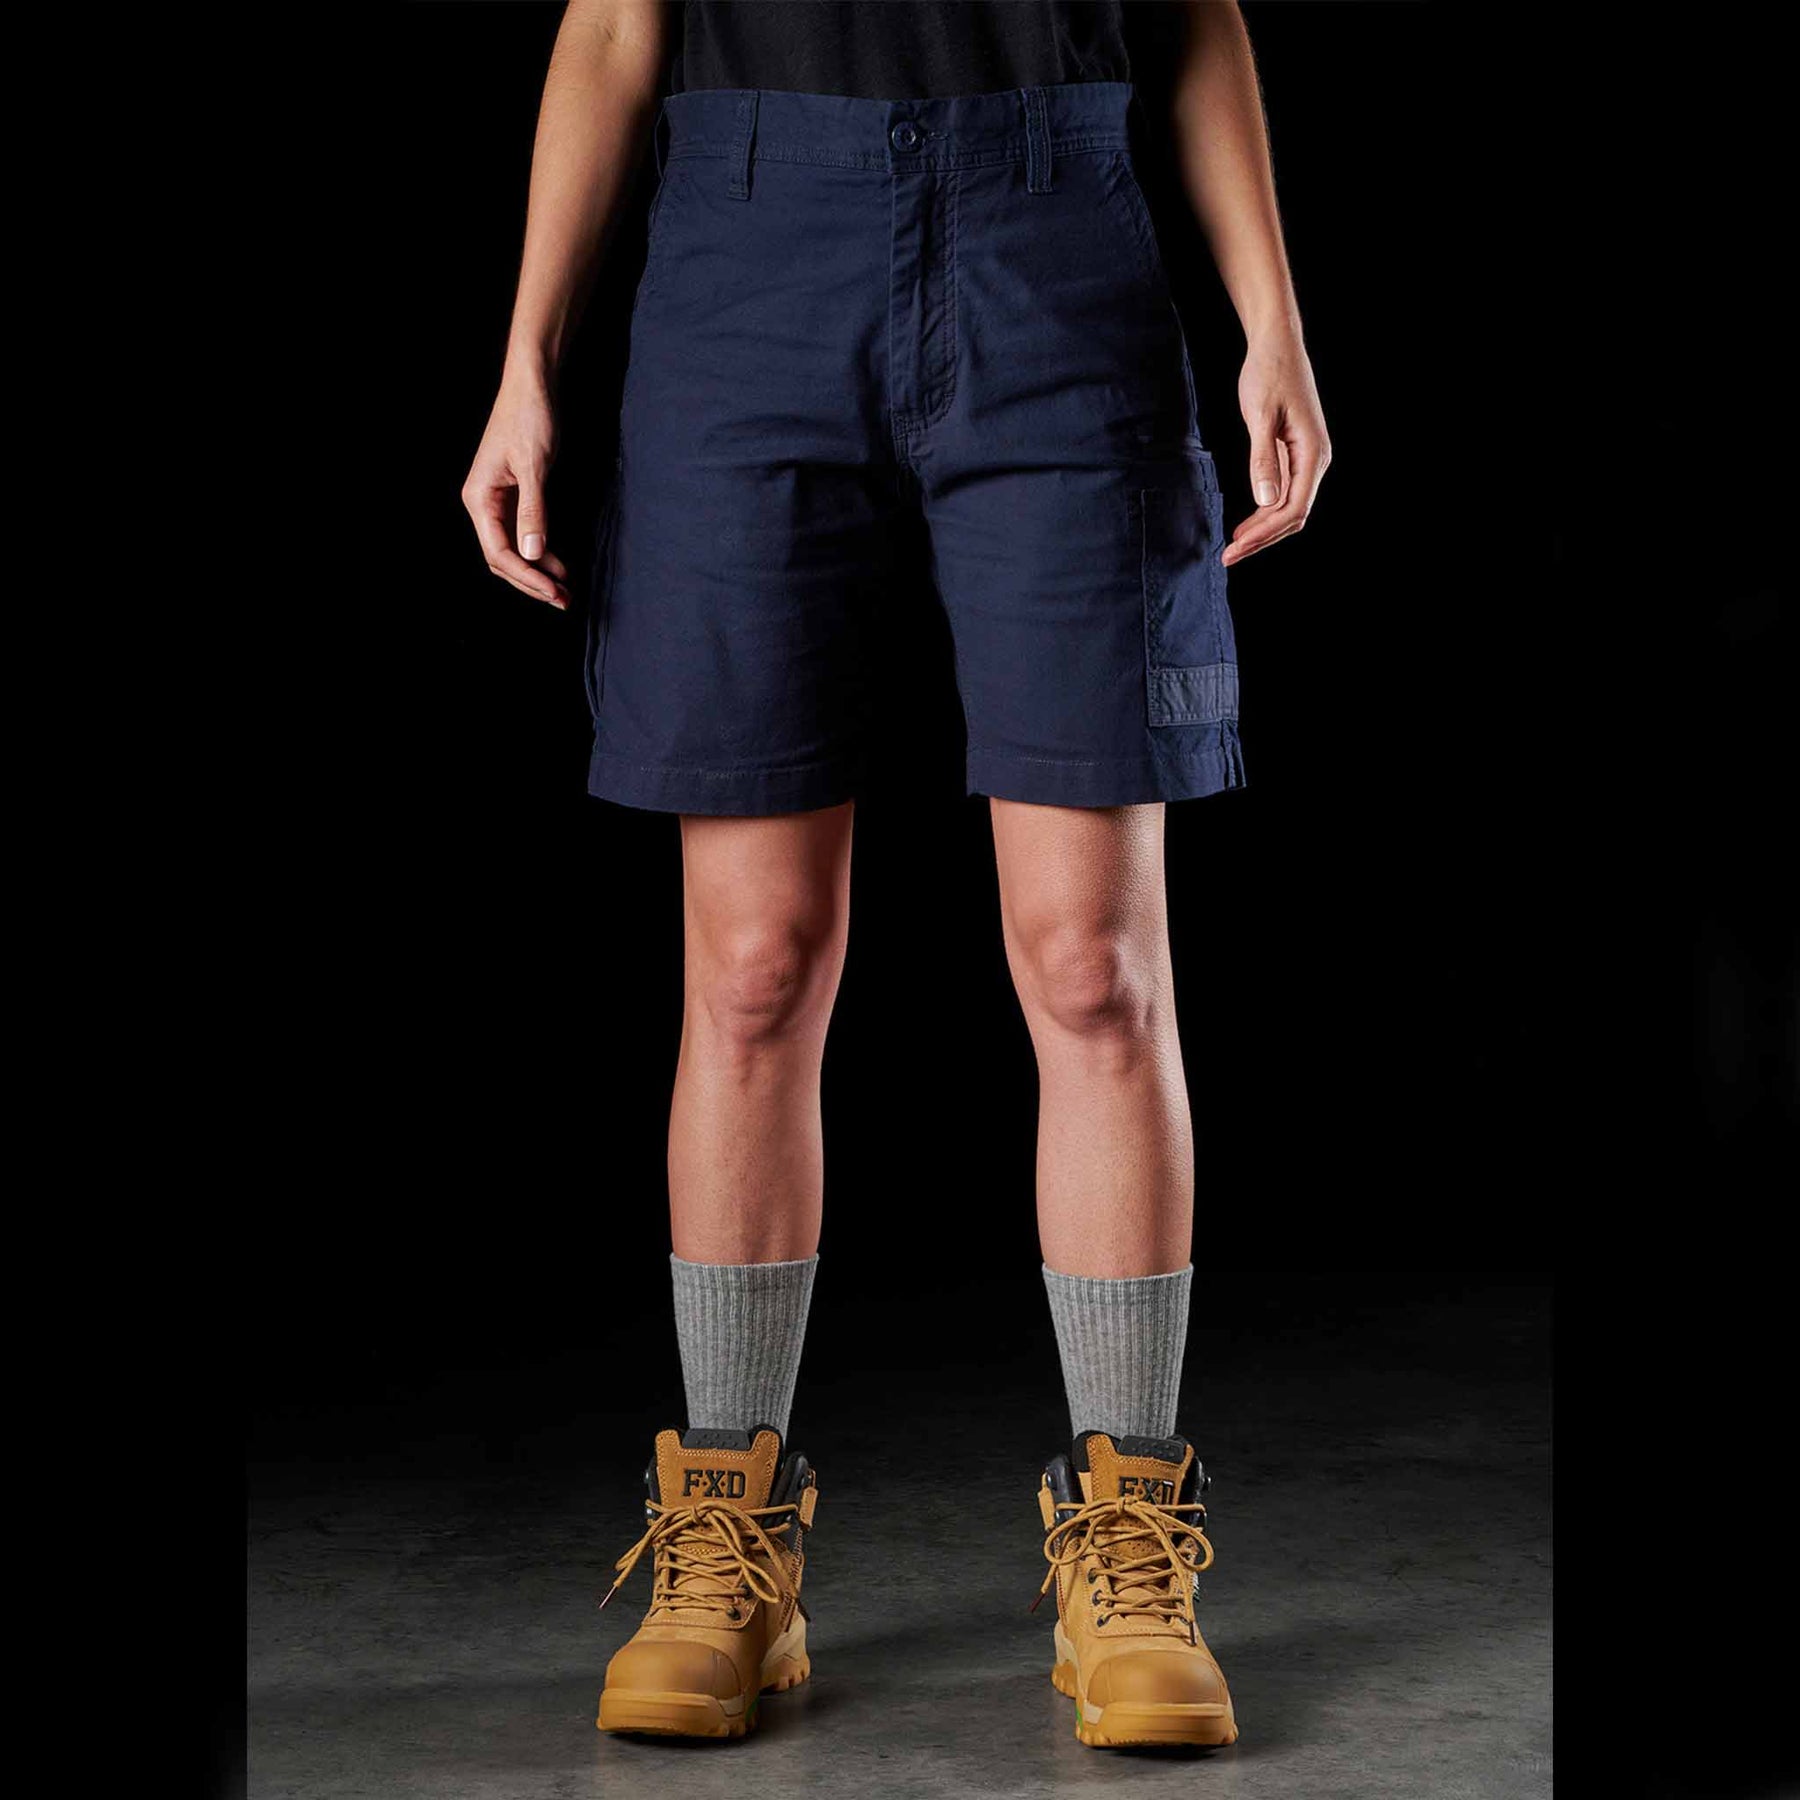 fxd womens stretch work shorts in navy